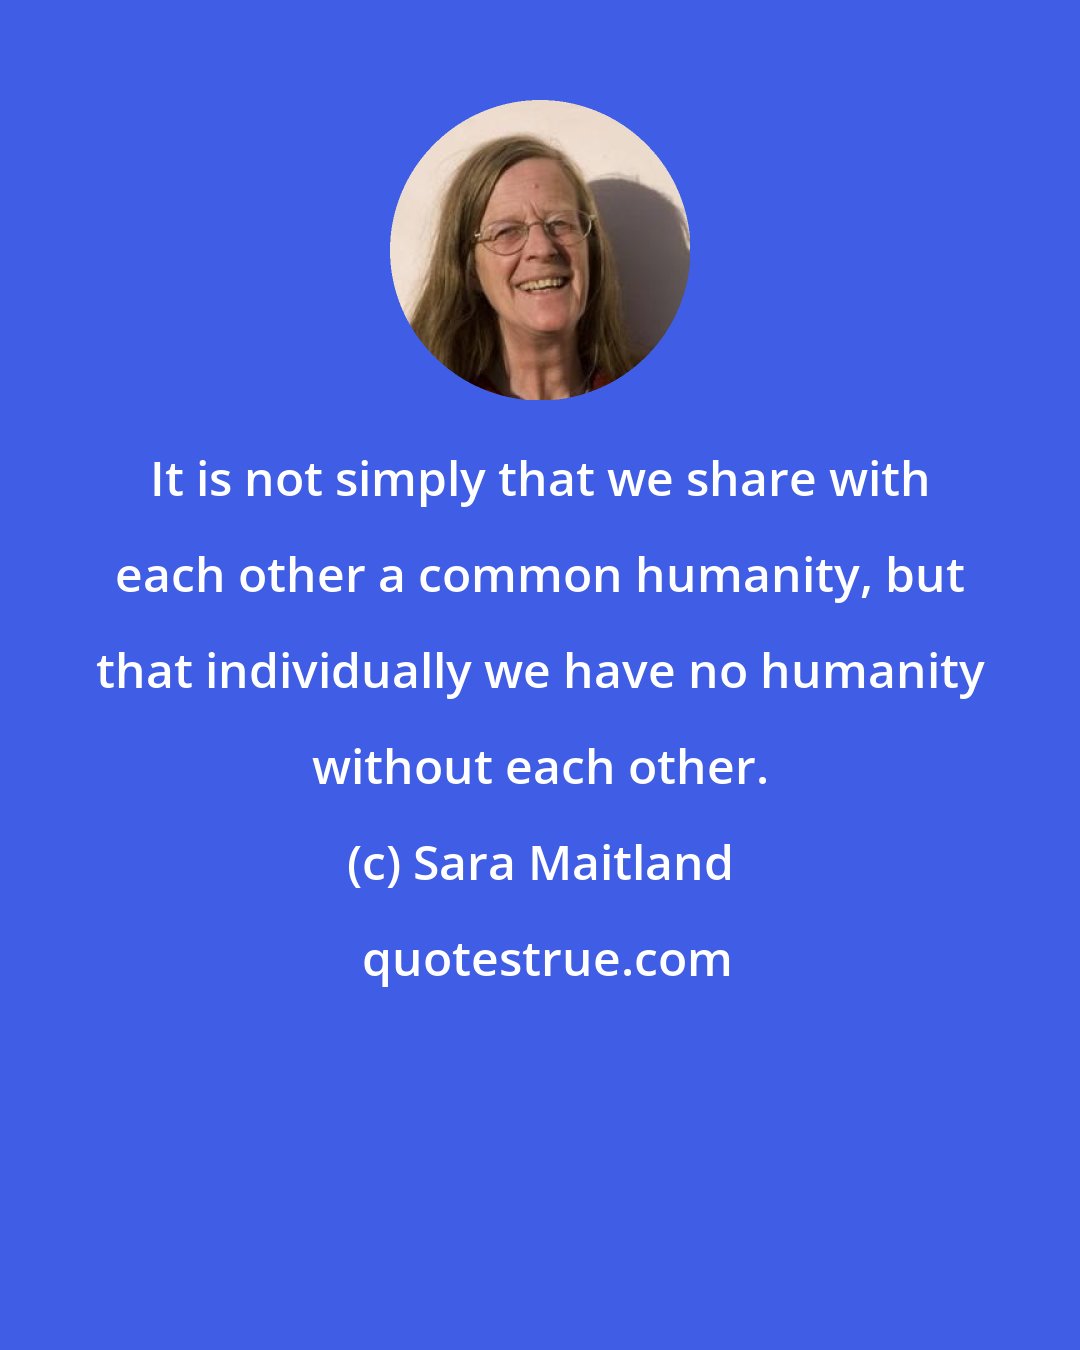 Sara Maitland: It is not simply that we share with each other a common humanity, but that individually we have no humanity without each other.